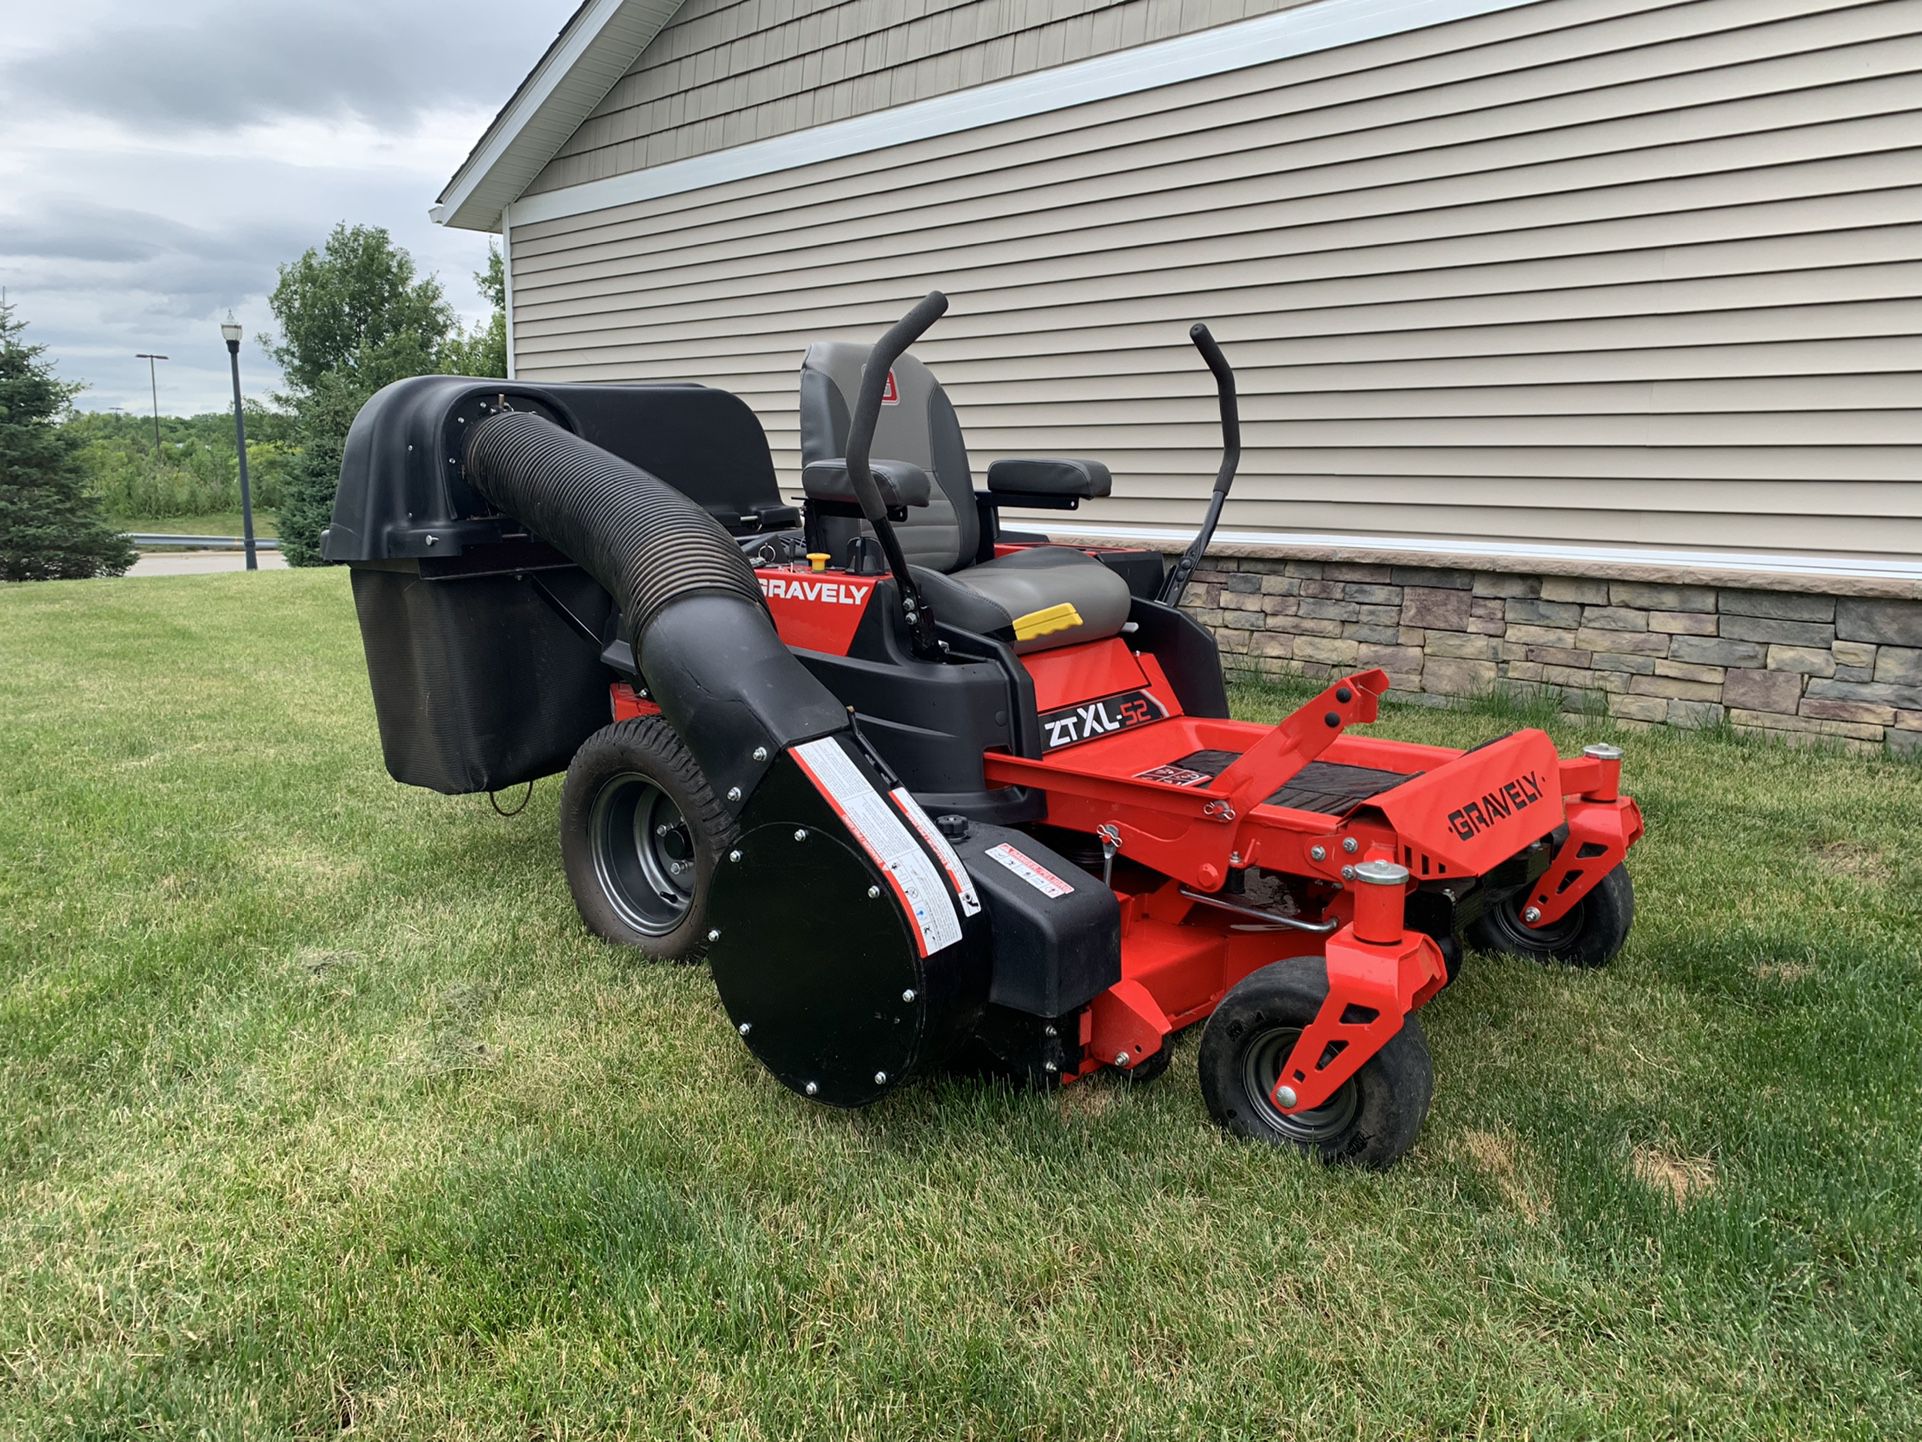 ****SOLD****Gravely ZT XL 52 Zero Turn Mower  Only 40.5 Hrs Mint Condition 